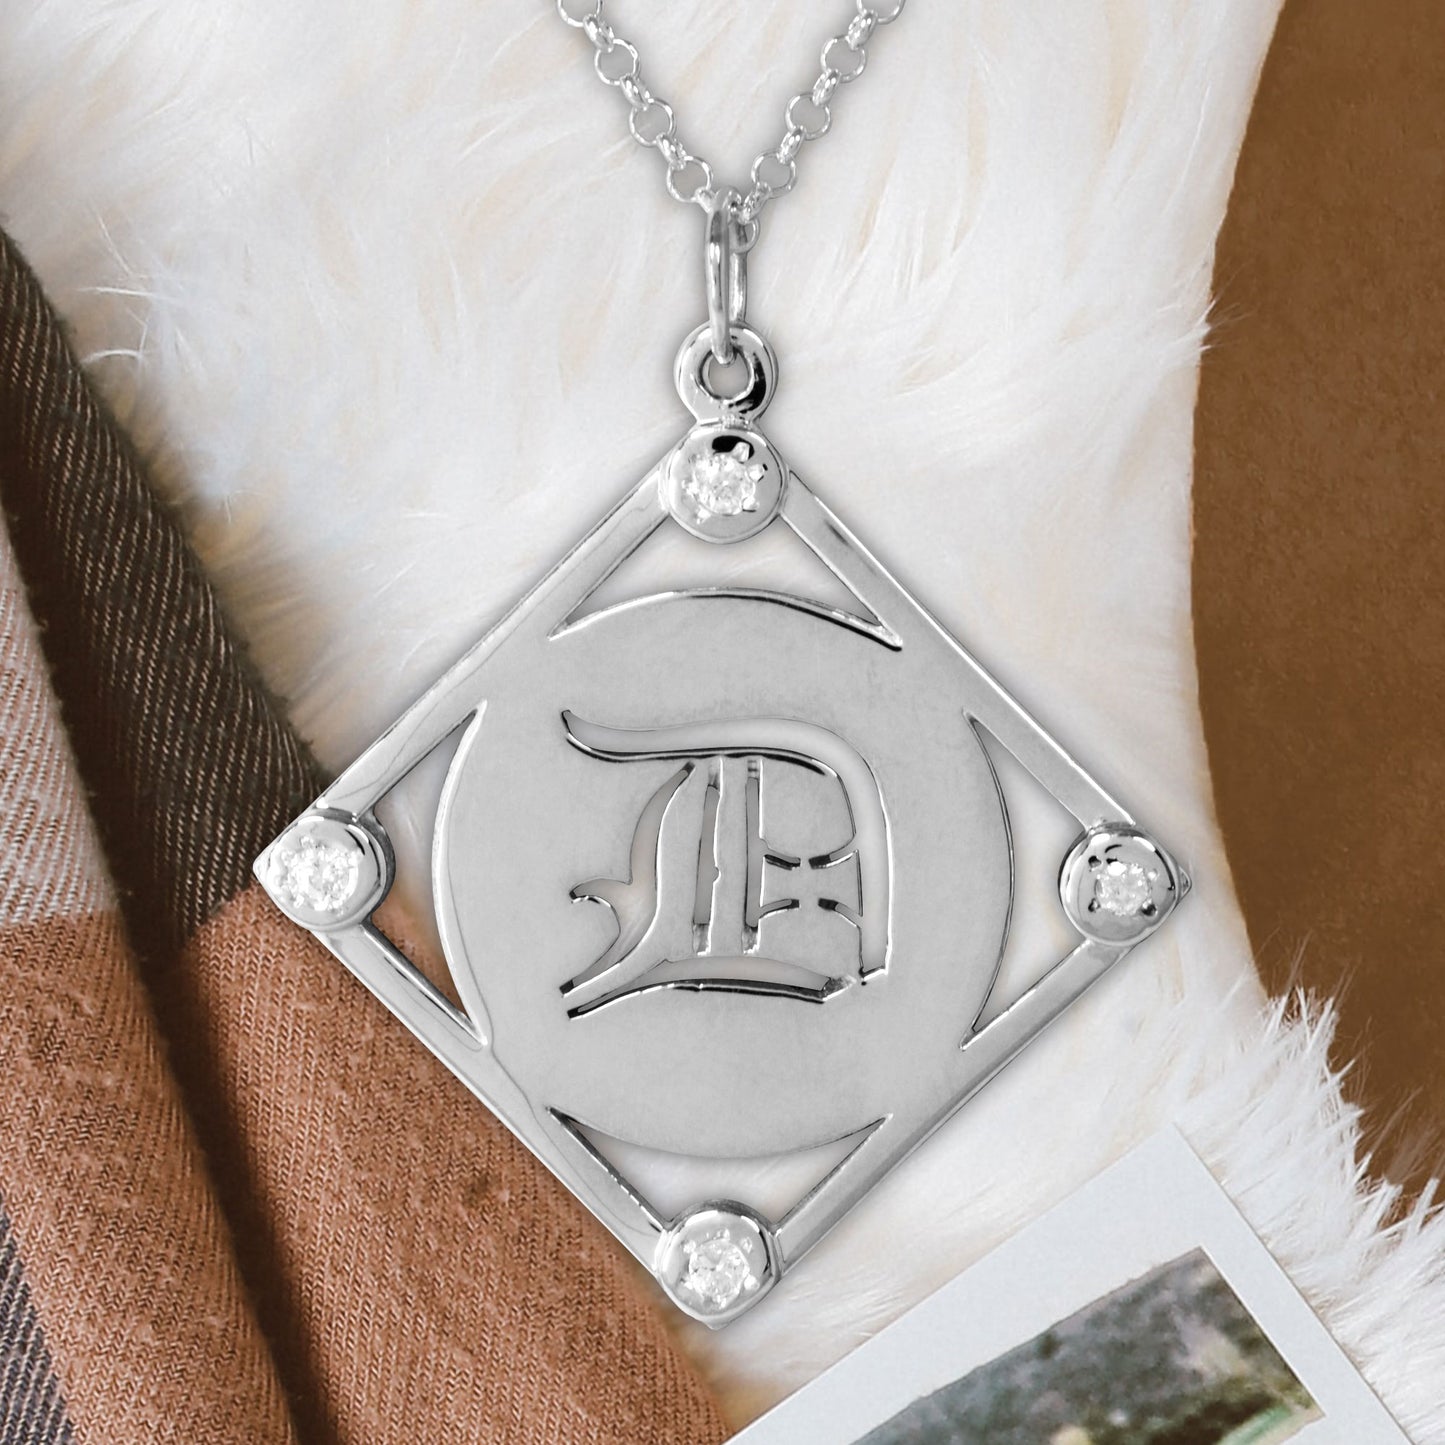 Personalized Dimond Accent  American Gothic Initial Pendant